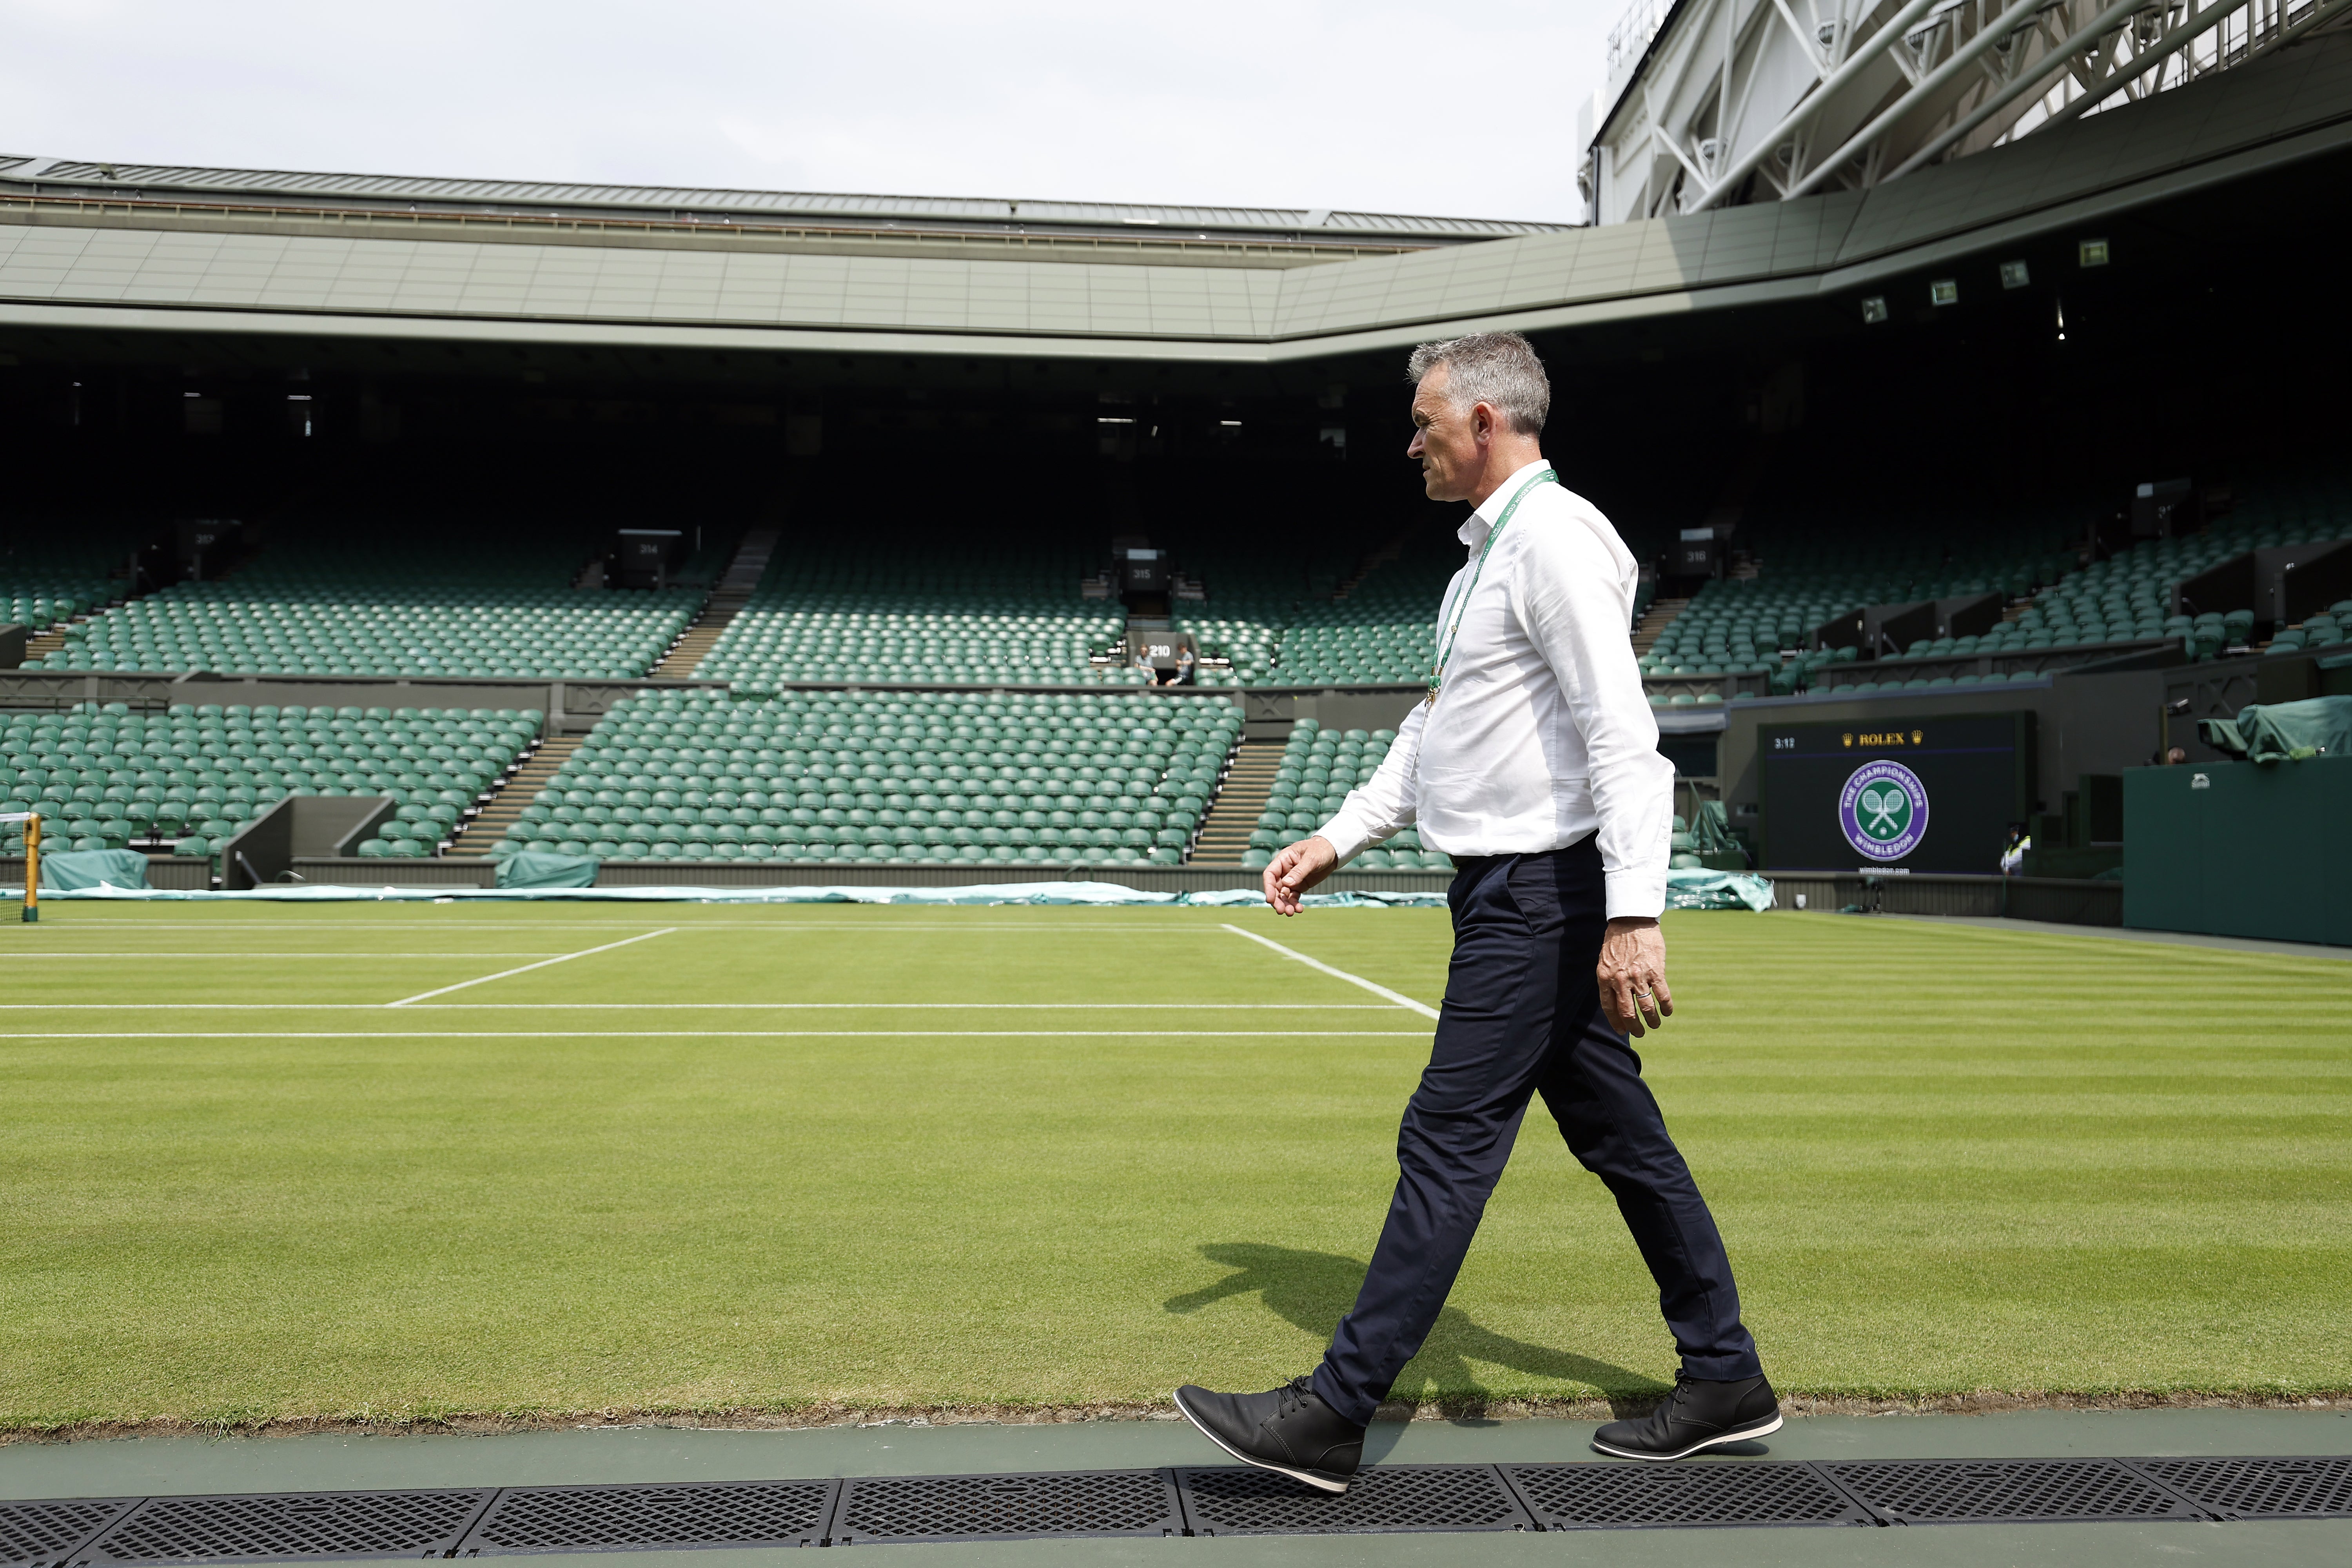 Head of Courts and Horticulture at Wimbledon Neil Stubley (Steven Paston/PA)